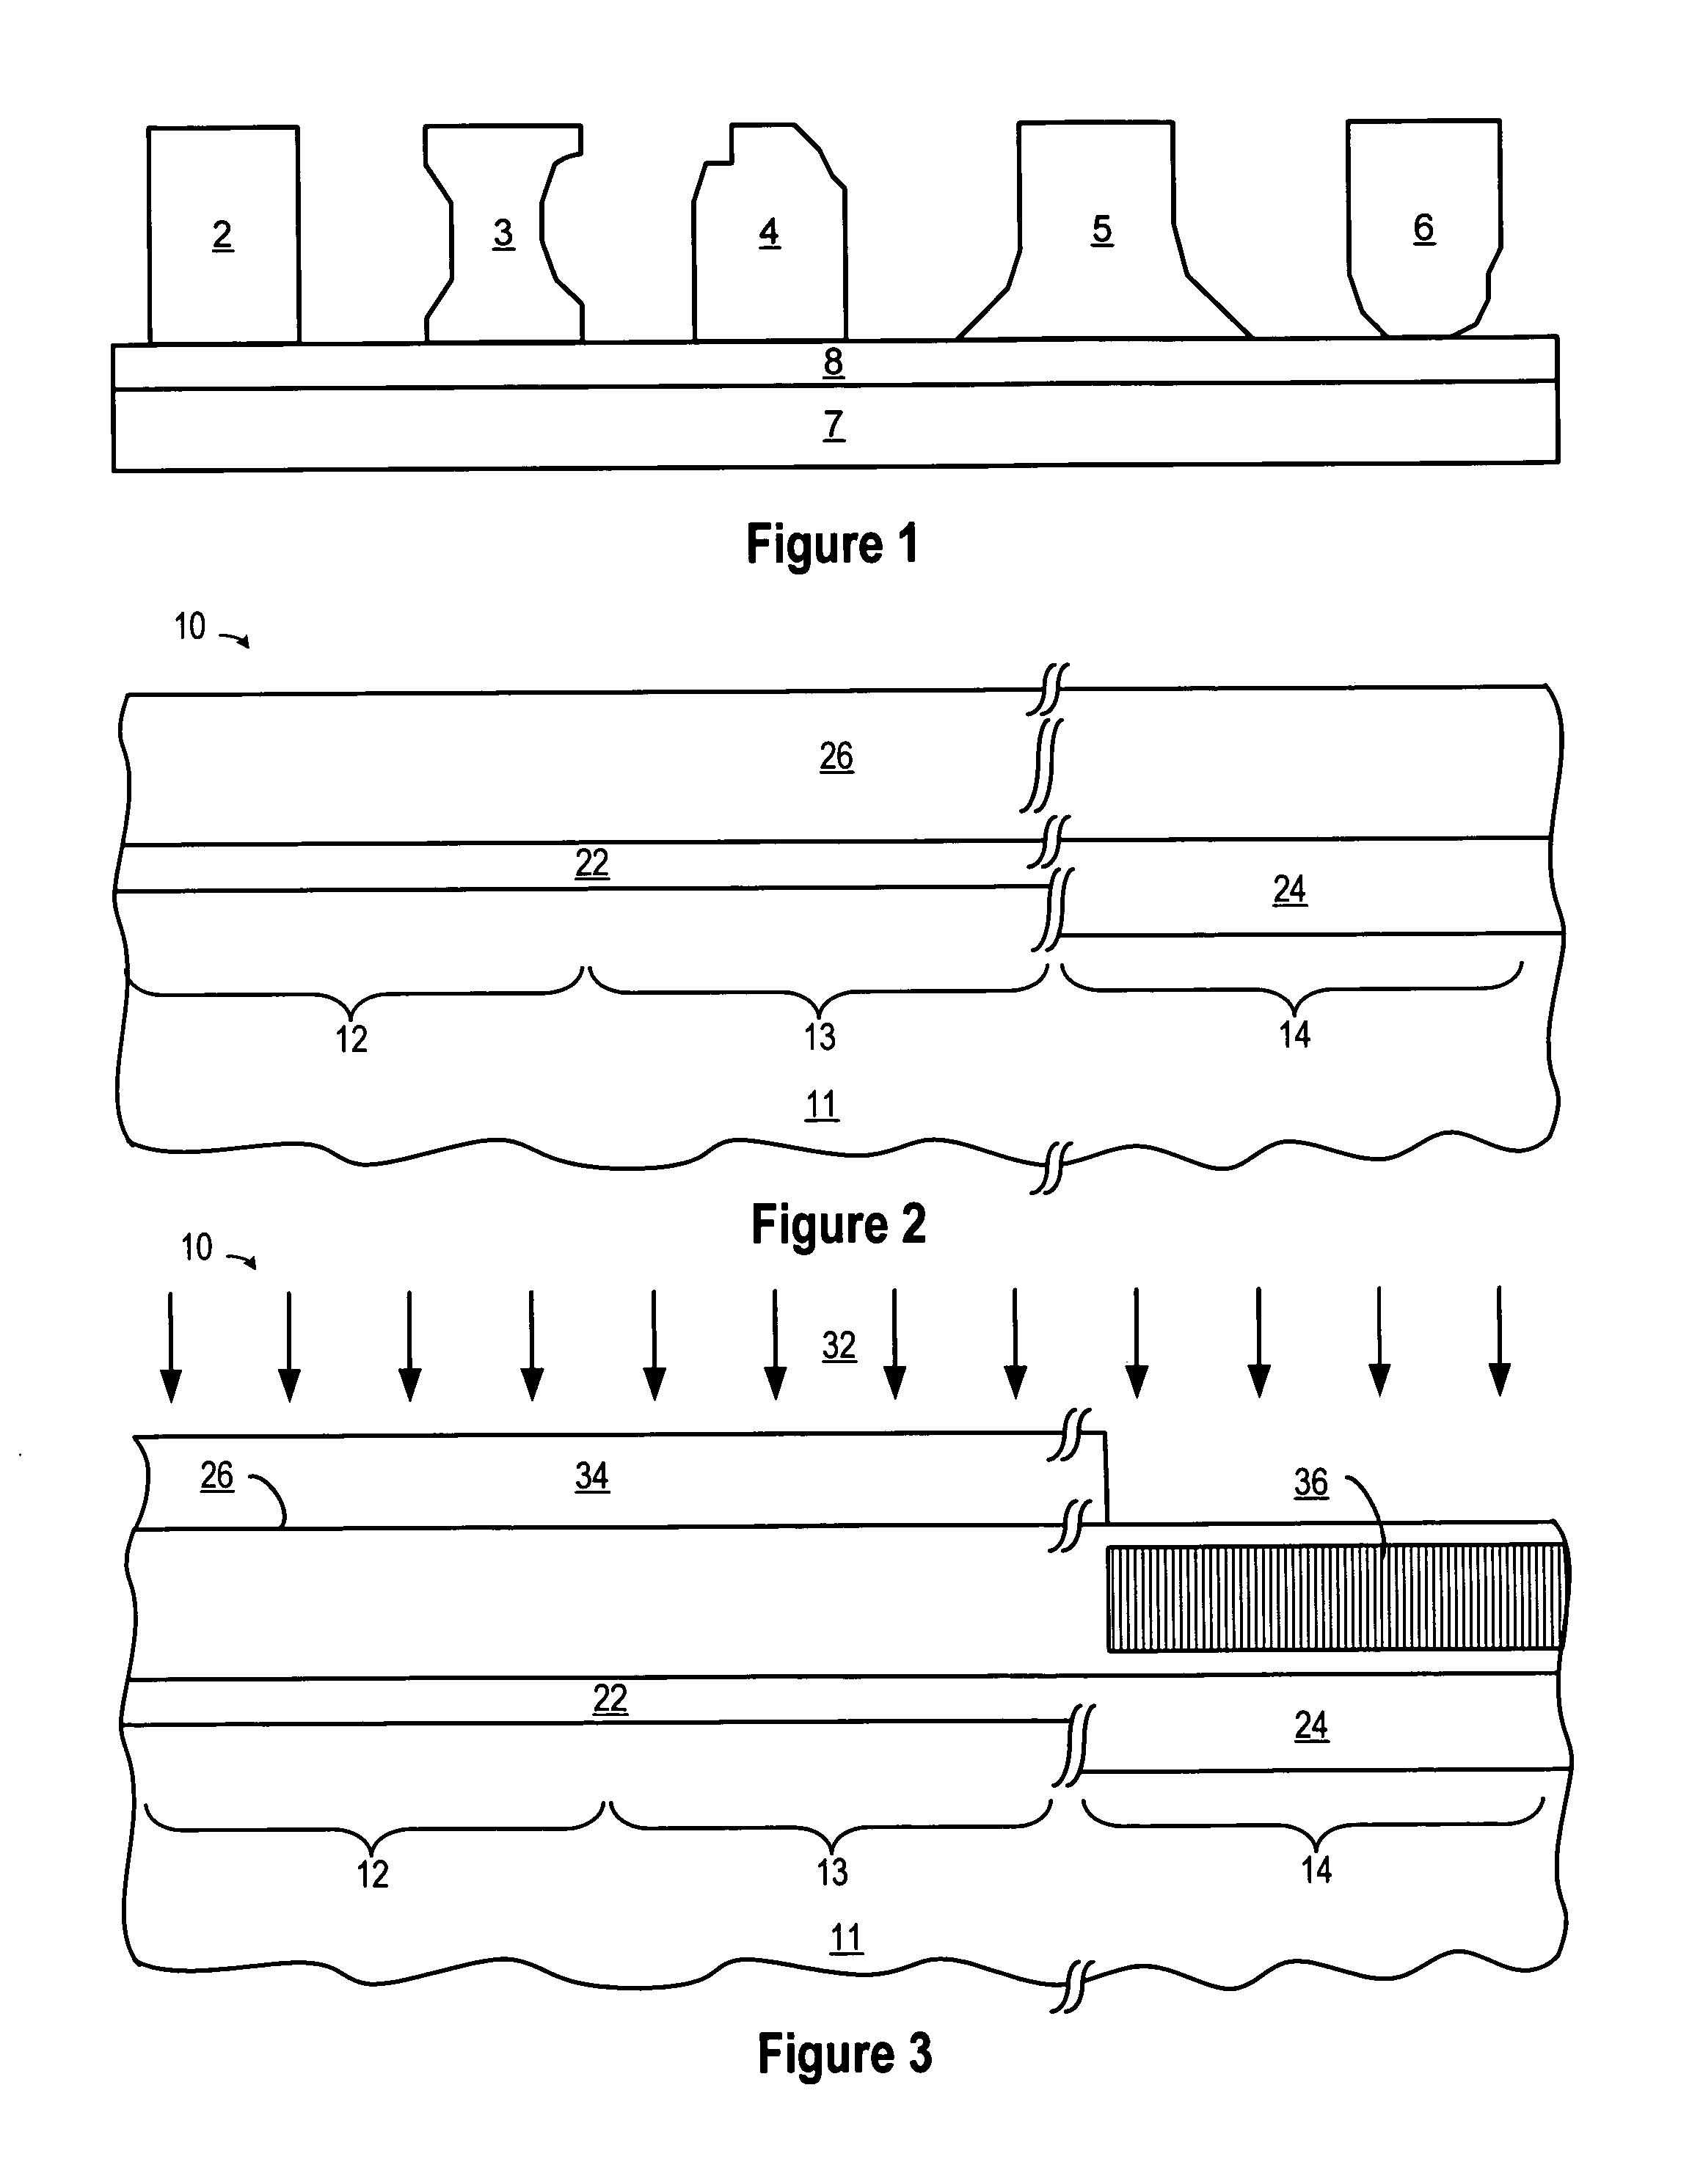 Undoped gate poly integration for improved gate patterning and cobalt silicide extendibility